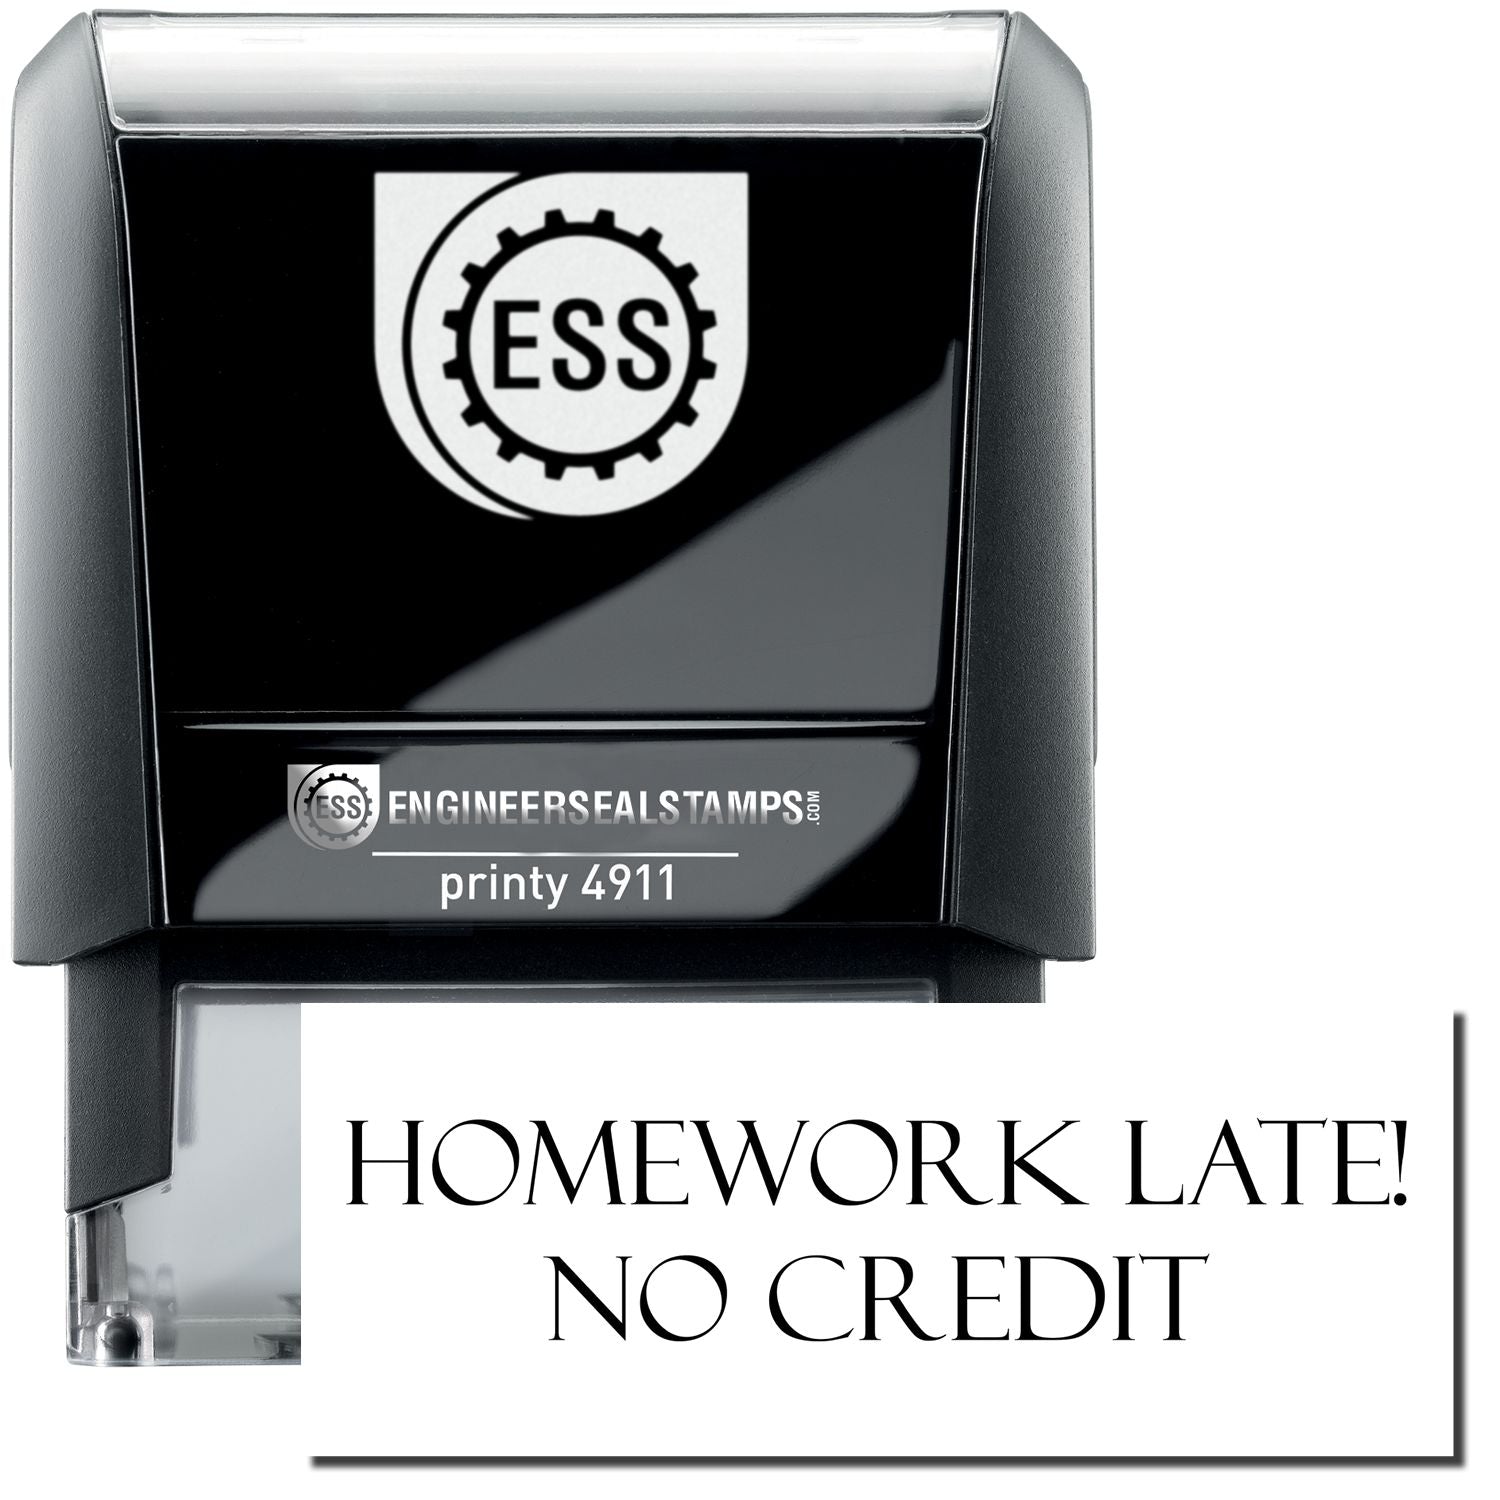 A self-inking stamp with a stamped image showing how the text "HOMEWORK LATE! NO CREDIT" is displayed after stamping.